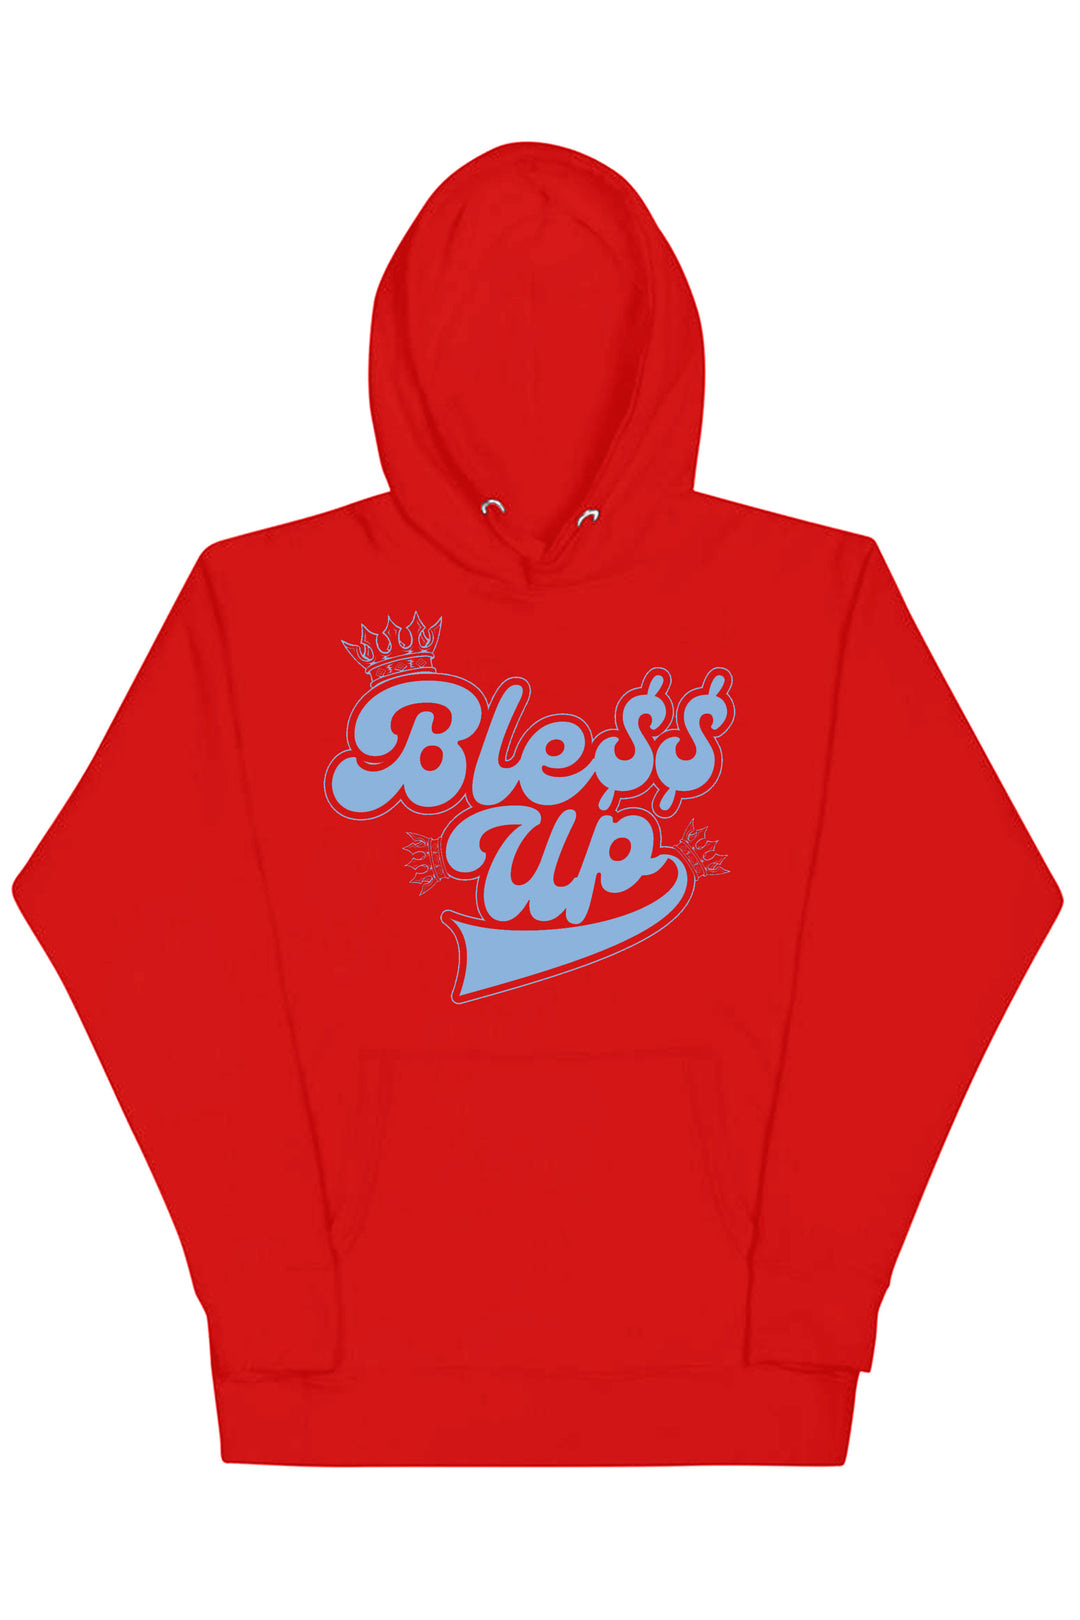 Bless Up Crowns Hoodie (Blue Logo) - Zamage